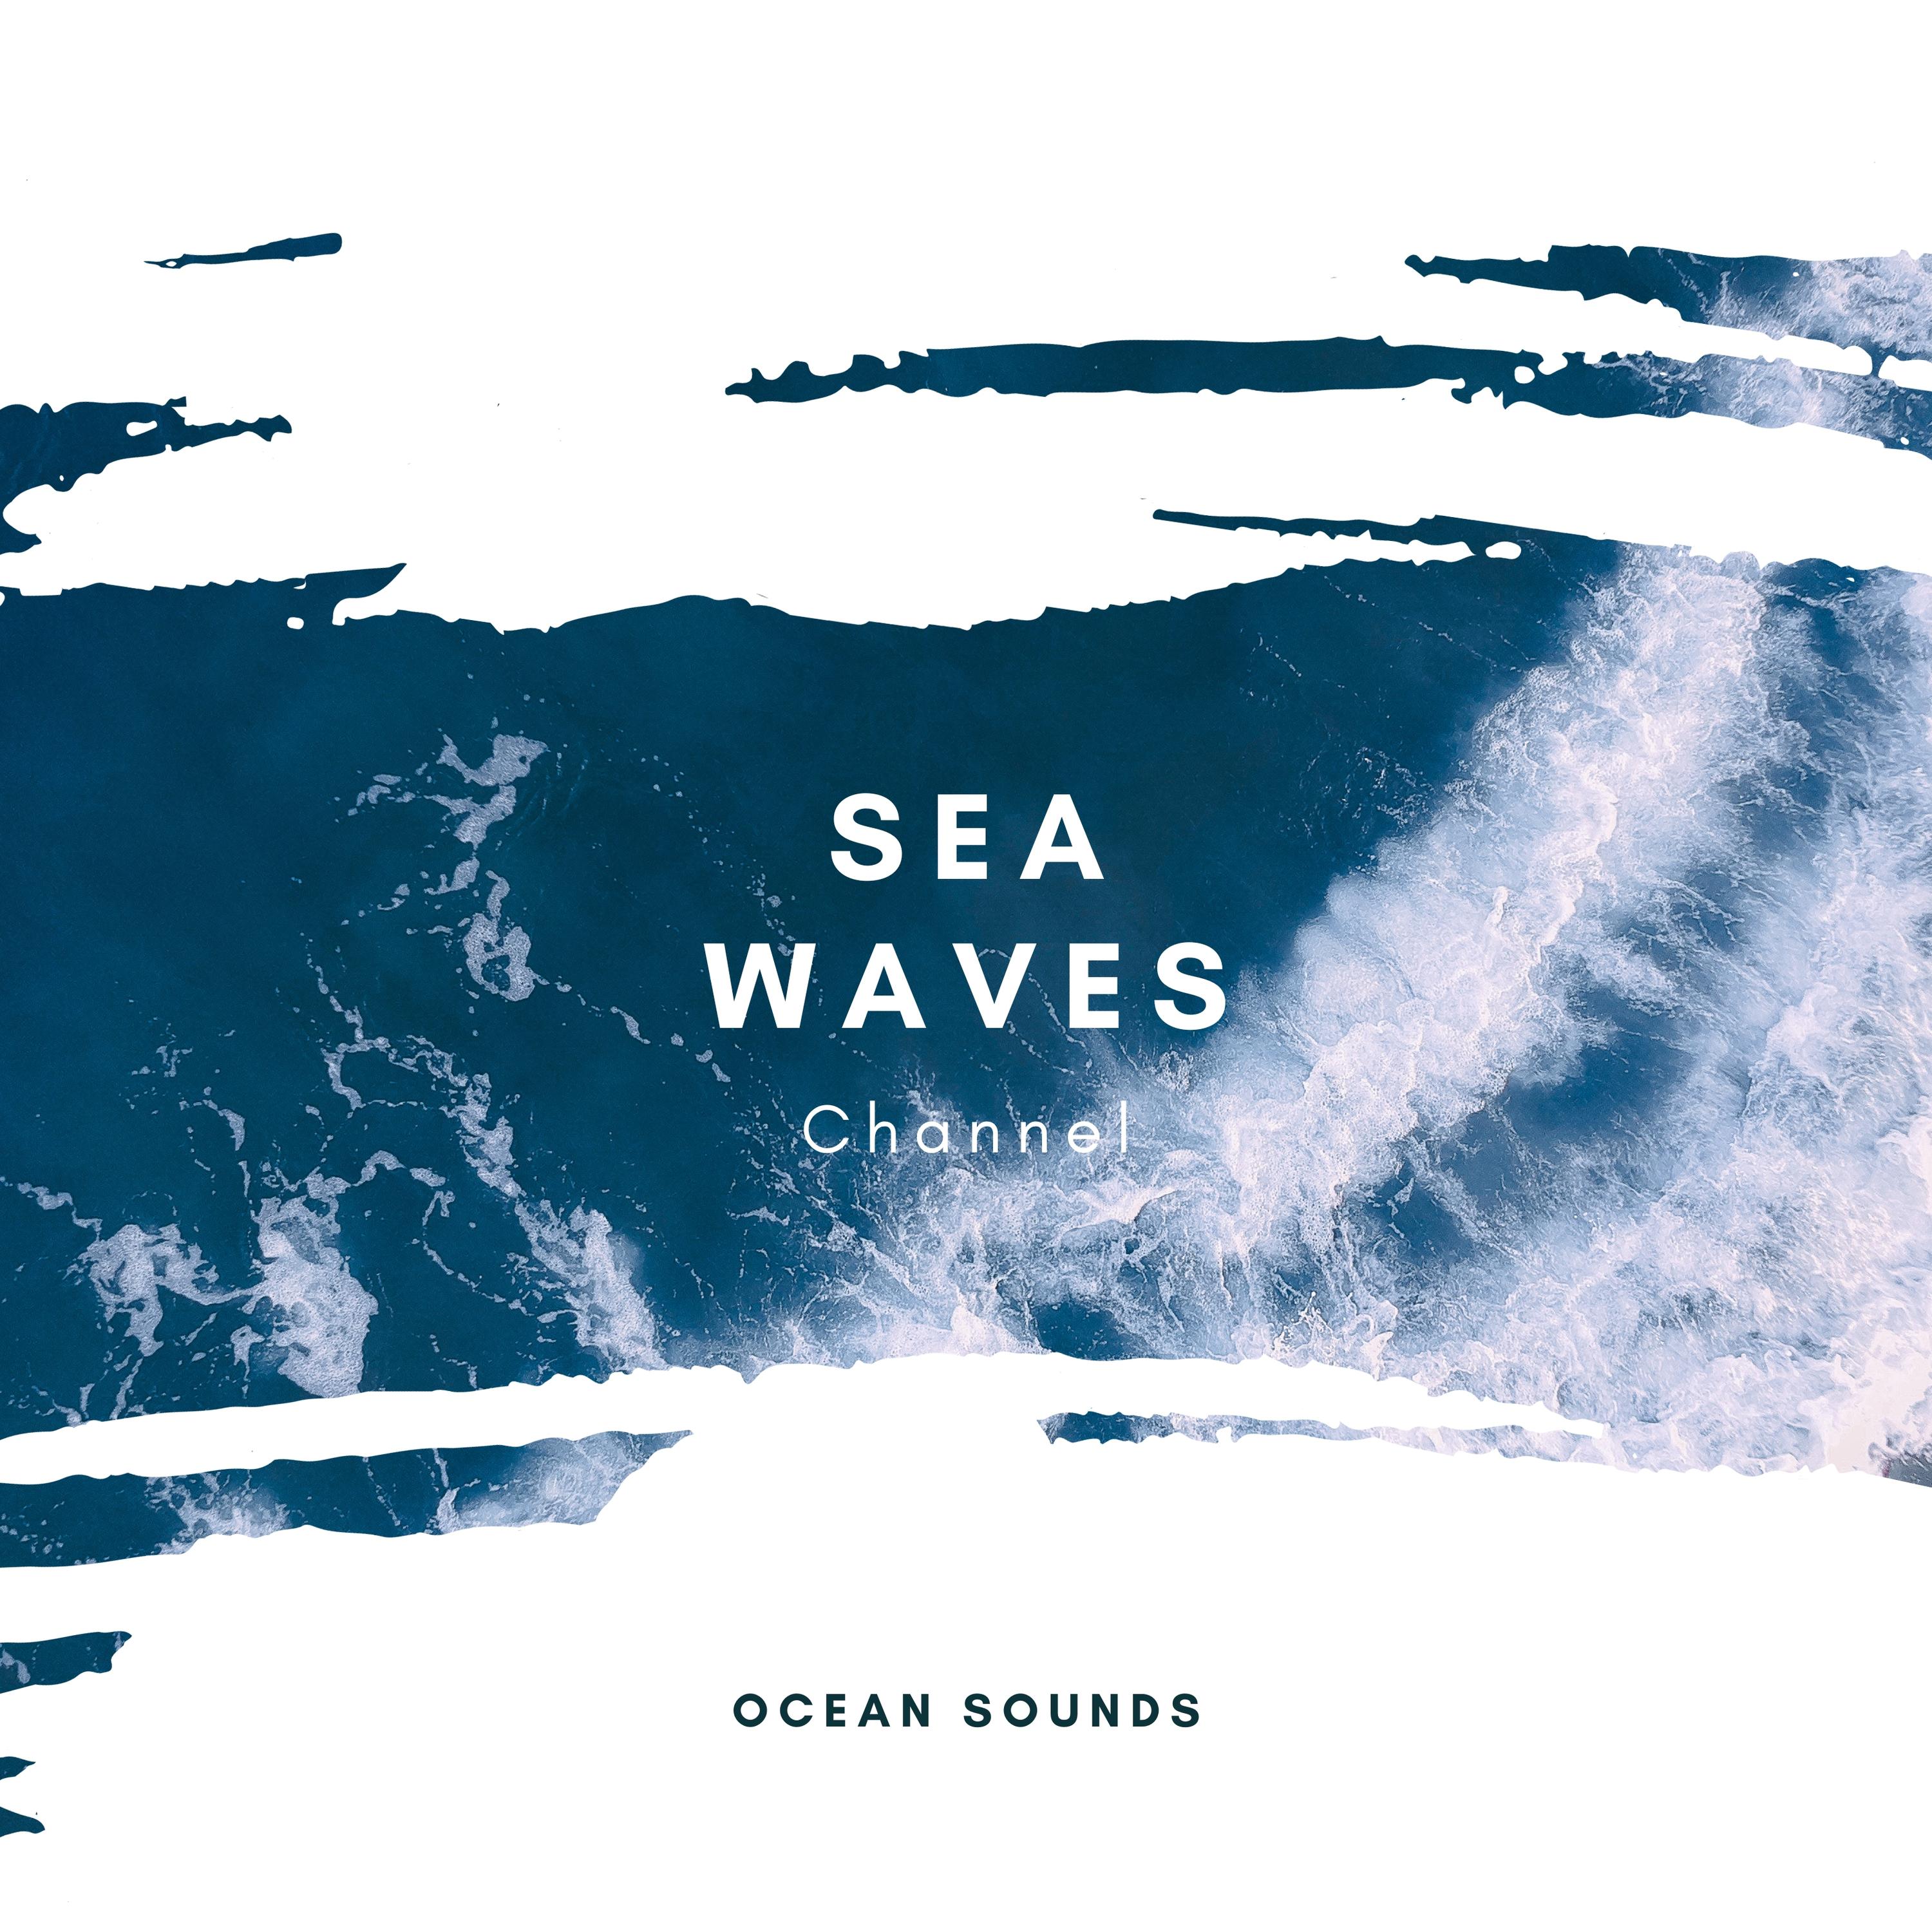 Sea Waves Channel - 20 Feet to the Sea